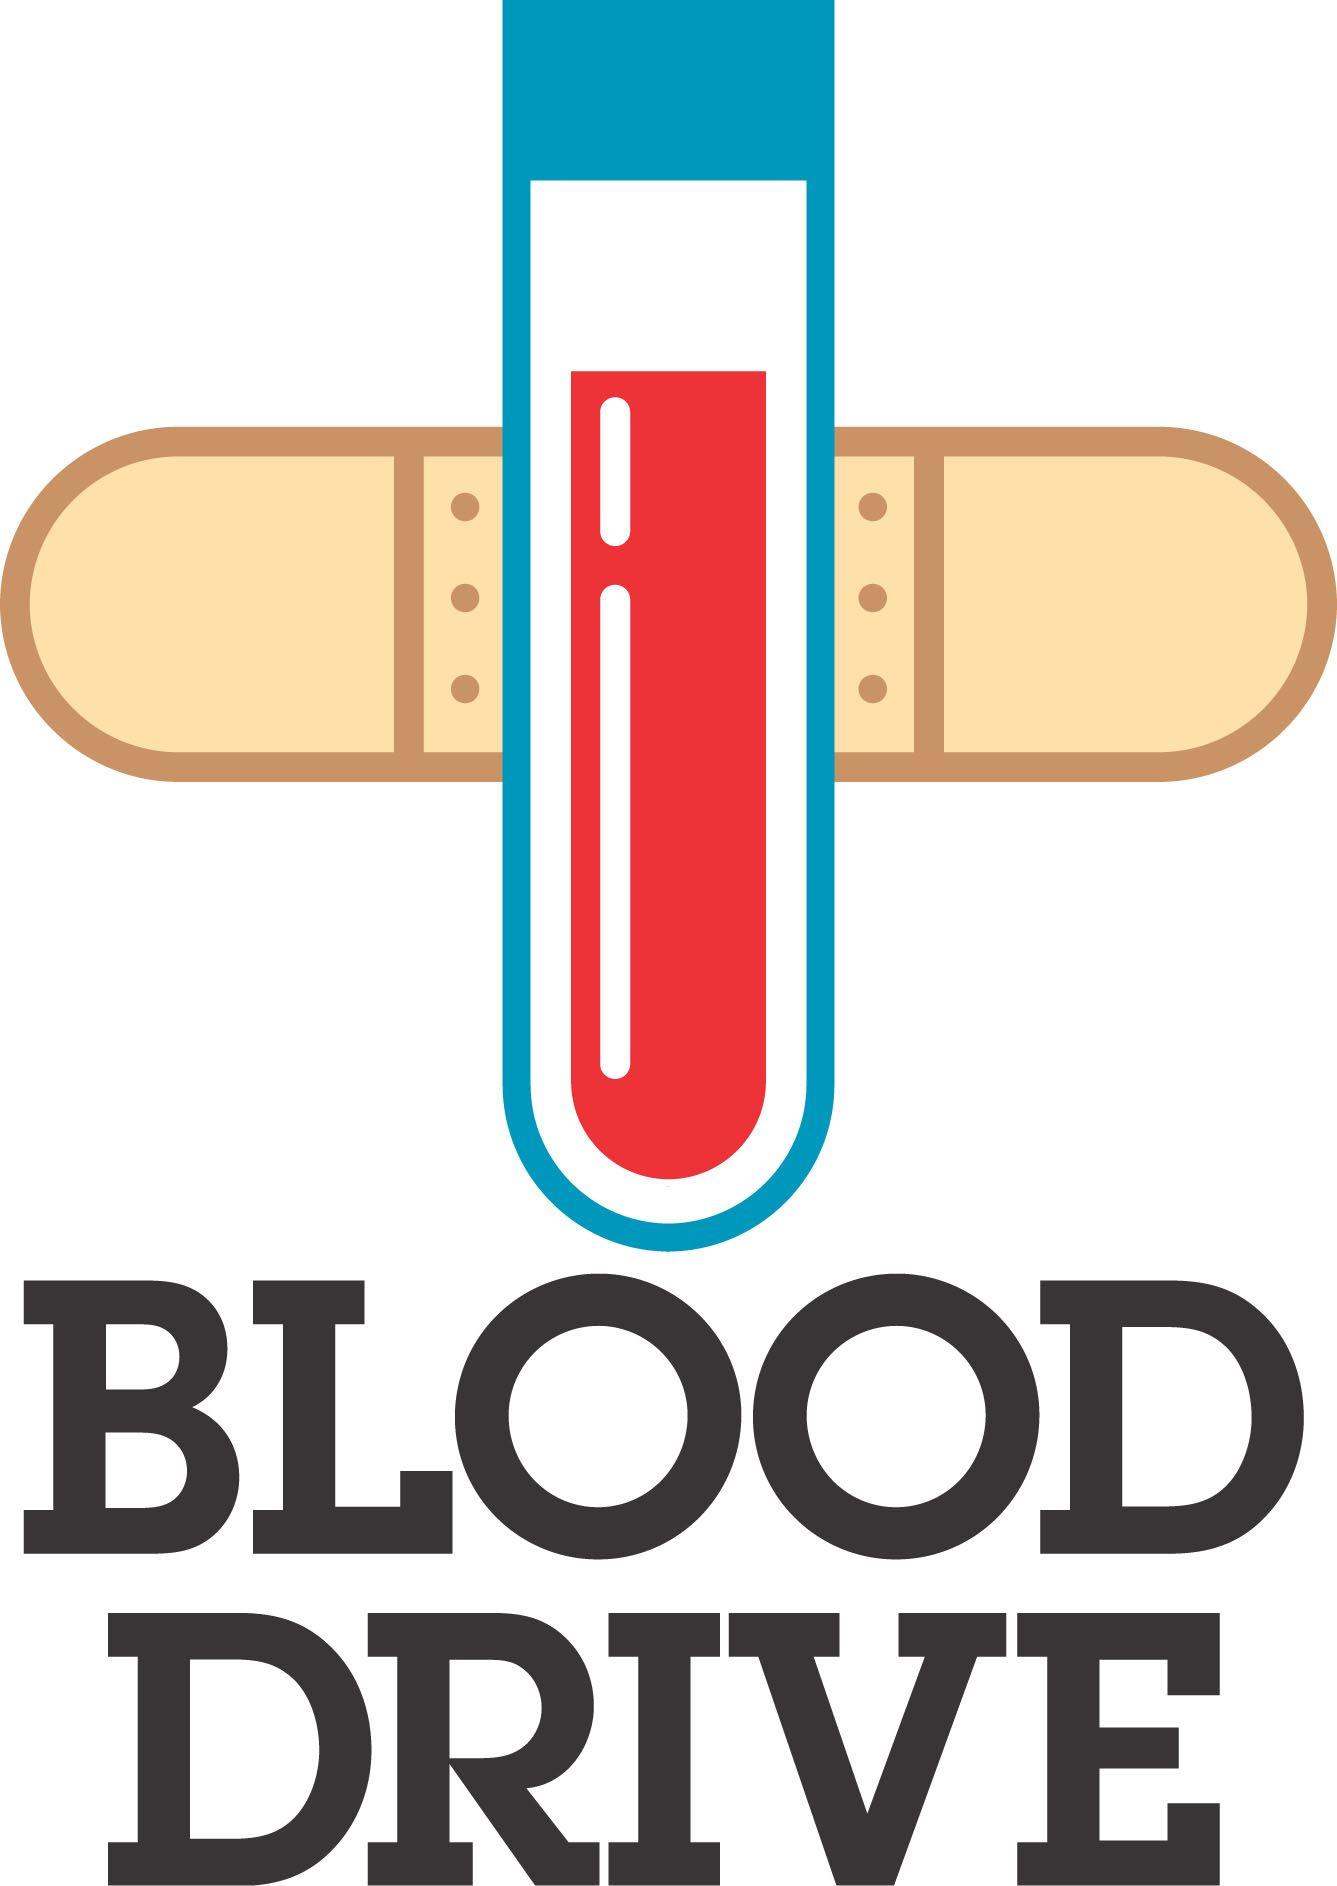 Blood Drive Logo - Free Red Cross Blood Drive Images, Download Free Clip Art, Free Clip ...